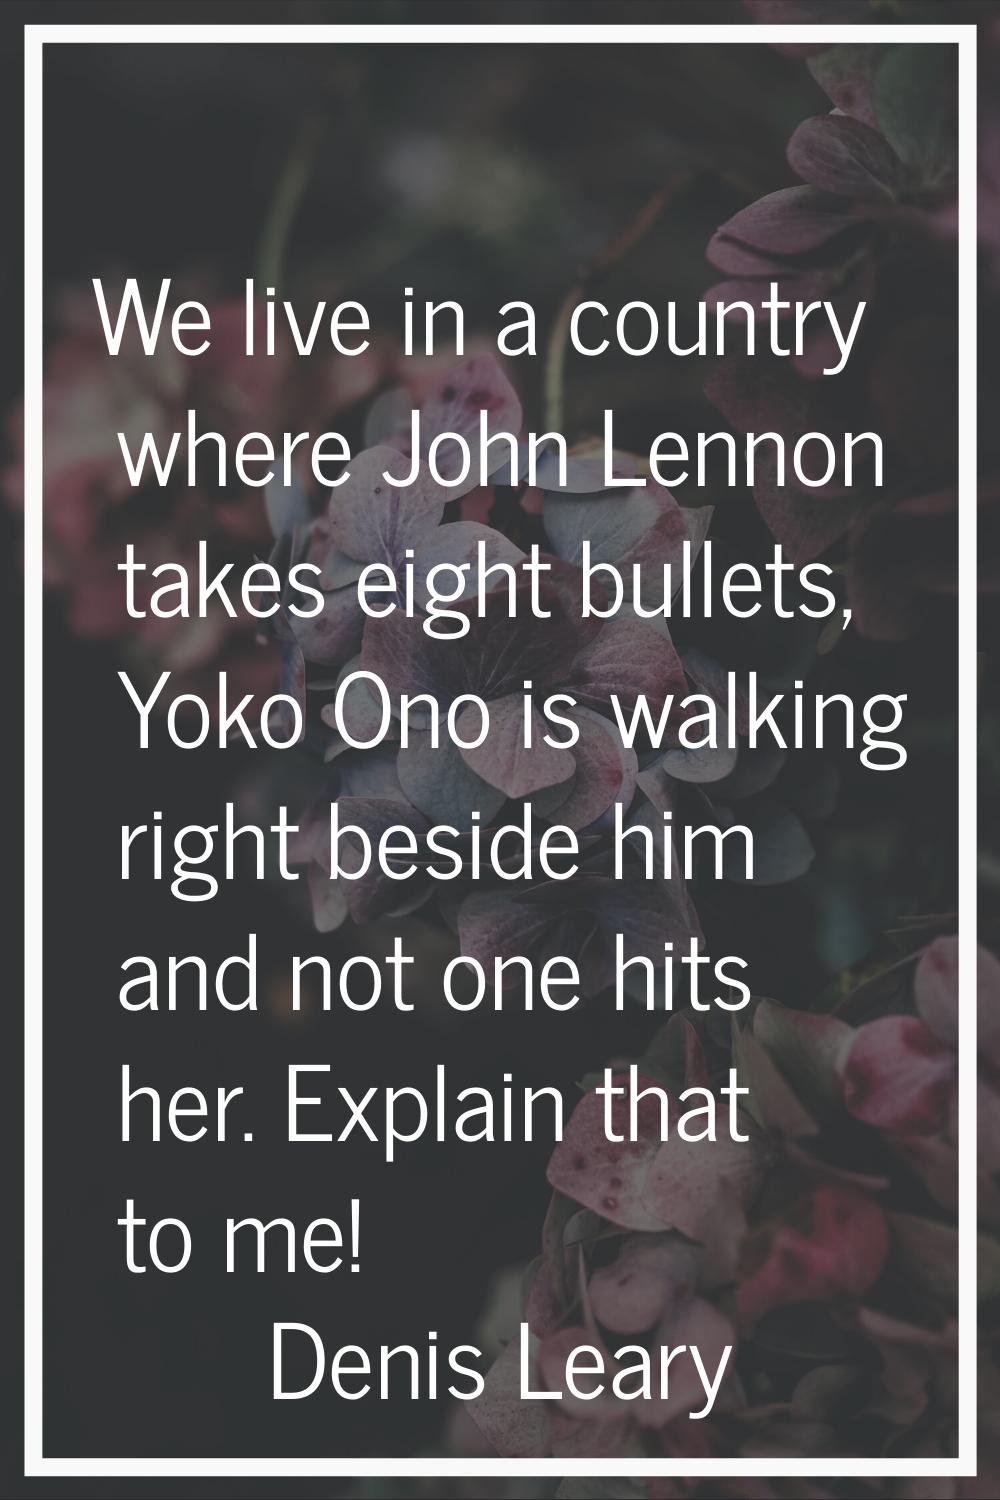 We live in a country where John Lennon takes eight bullets, Yoko Ono is walking right beside him an